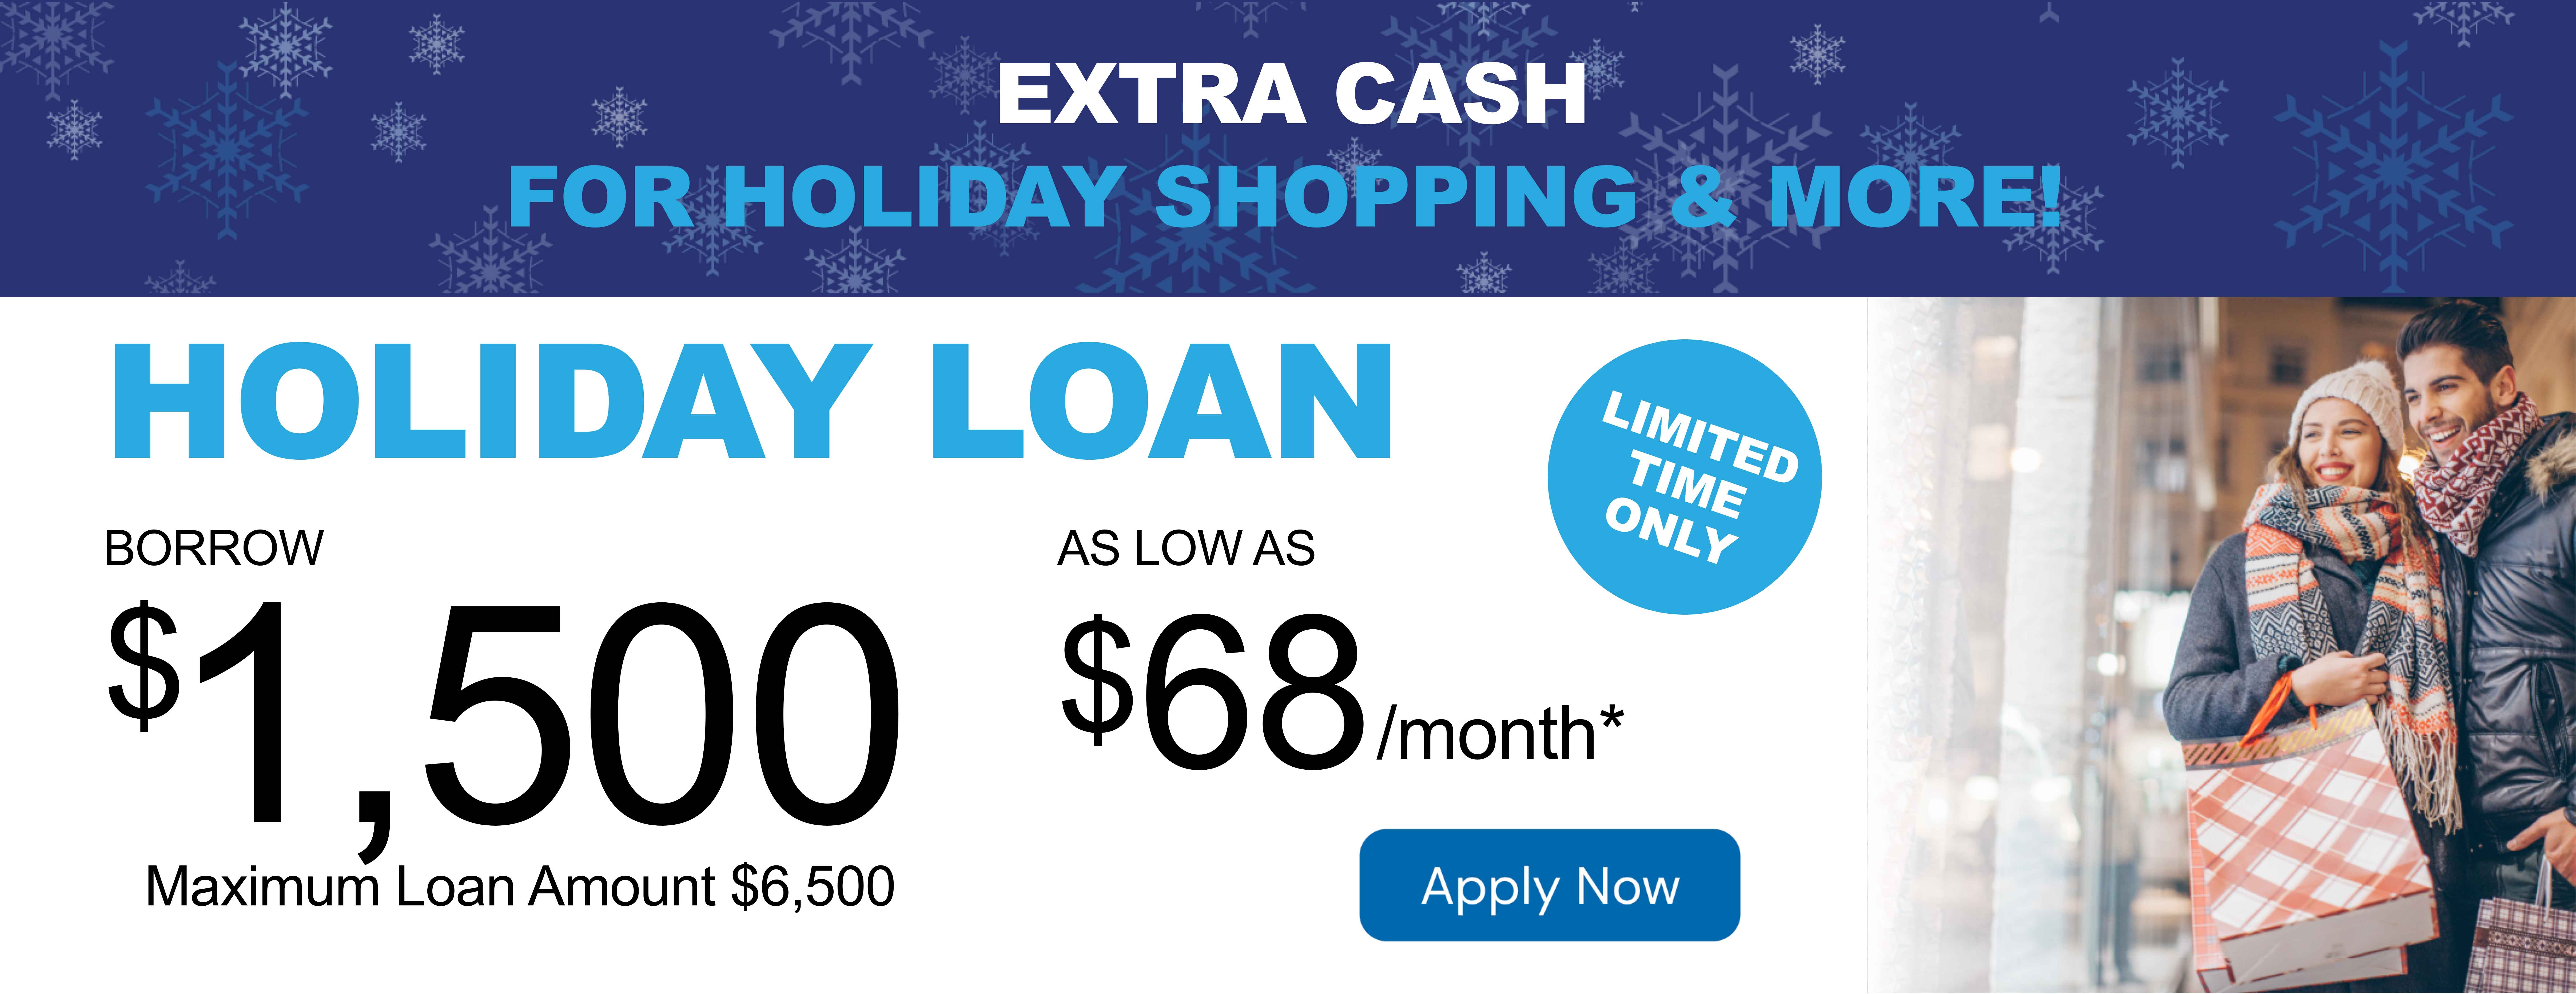 Holiday Loan Special